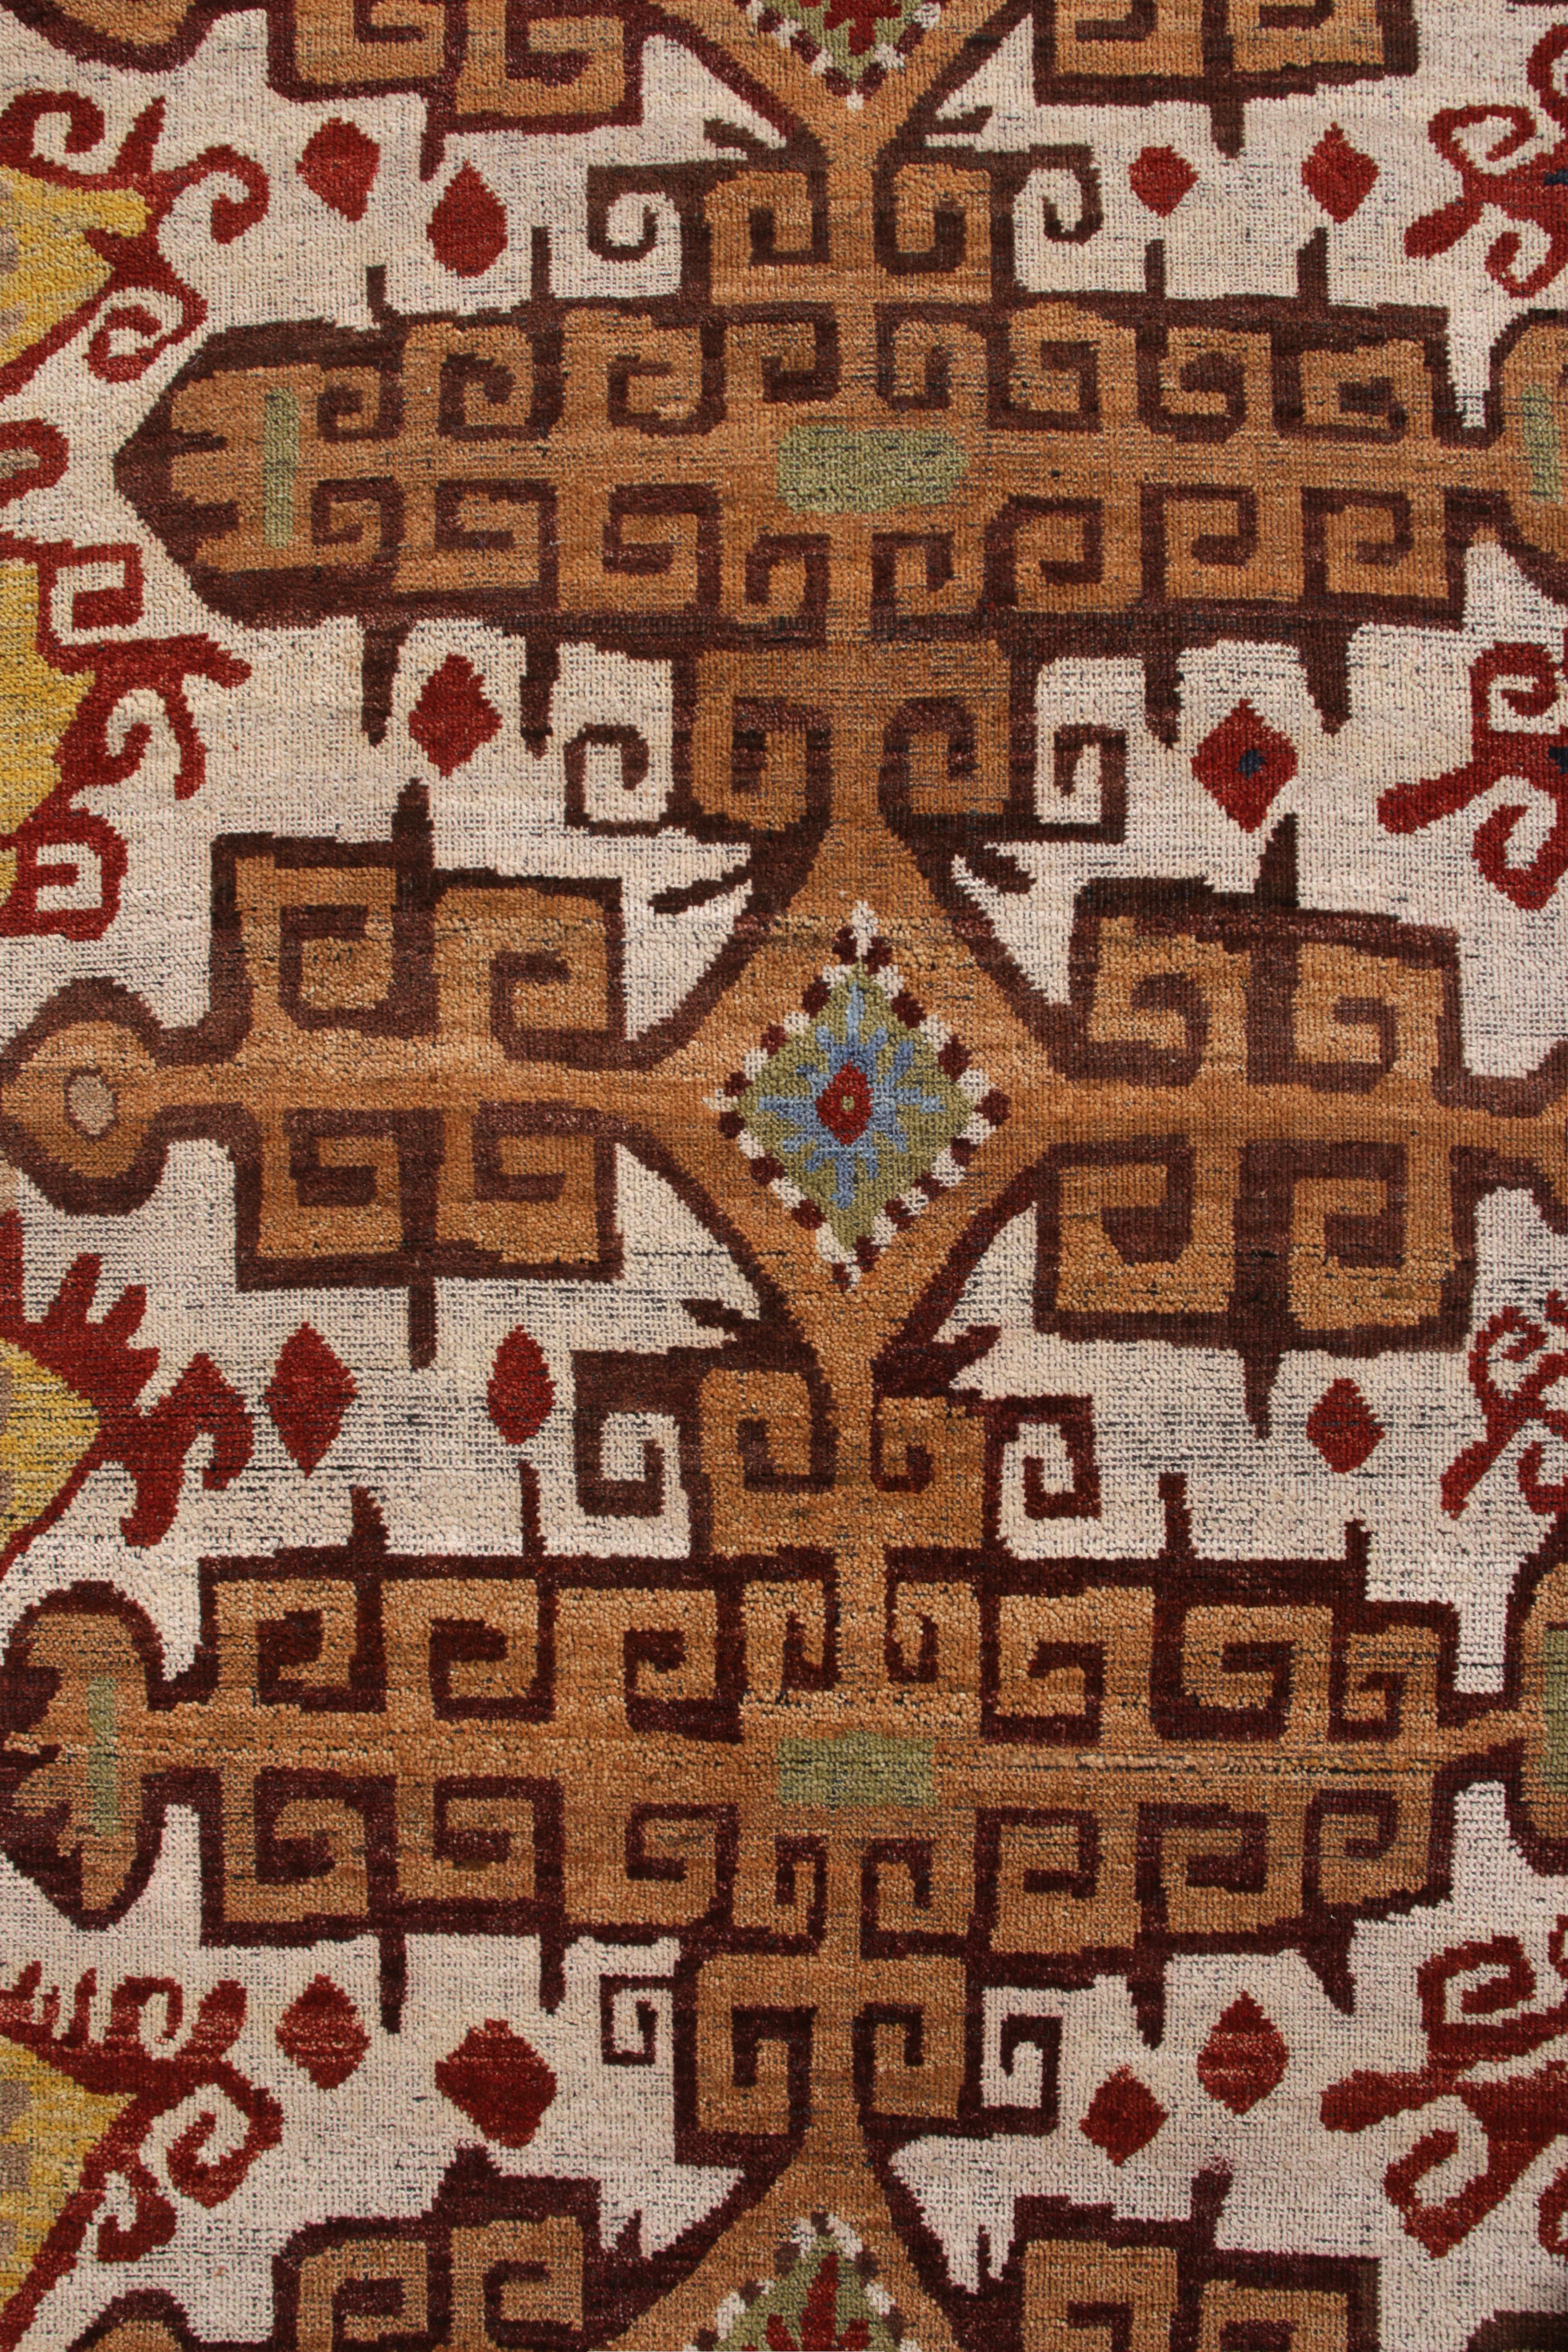 Hand-Knotted Rug & Kilim’s Russian Style Rug in Orange and Beige Brown Tribal Pattern